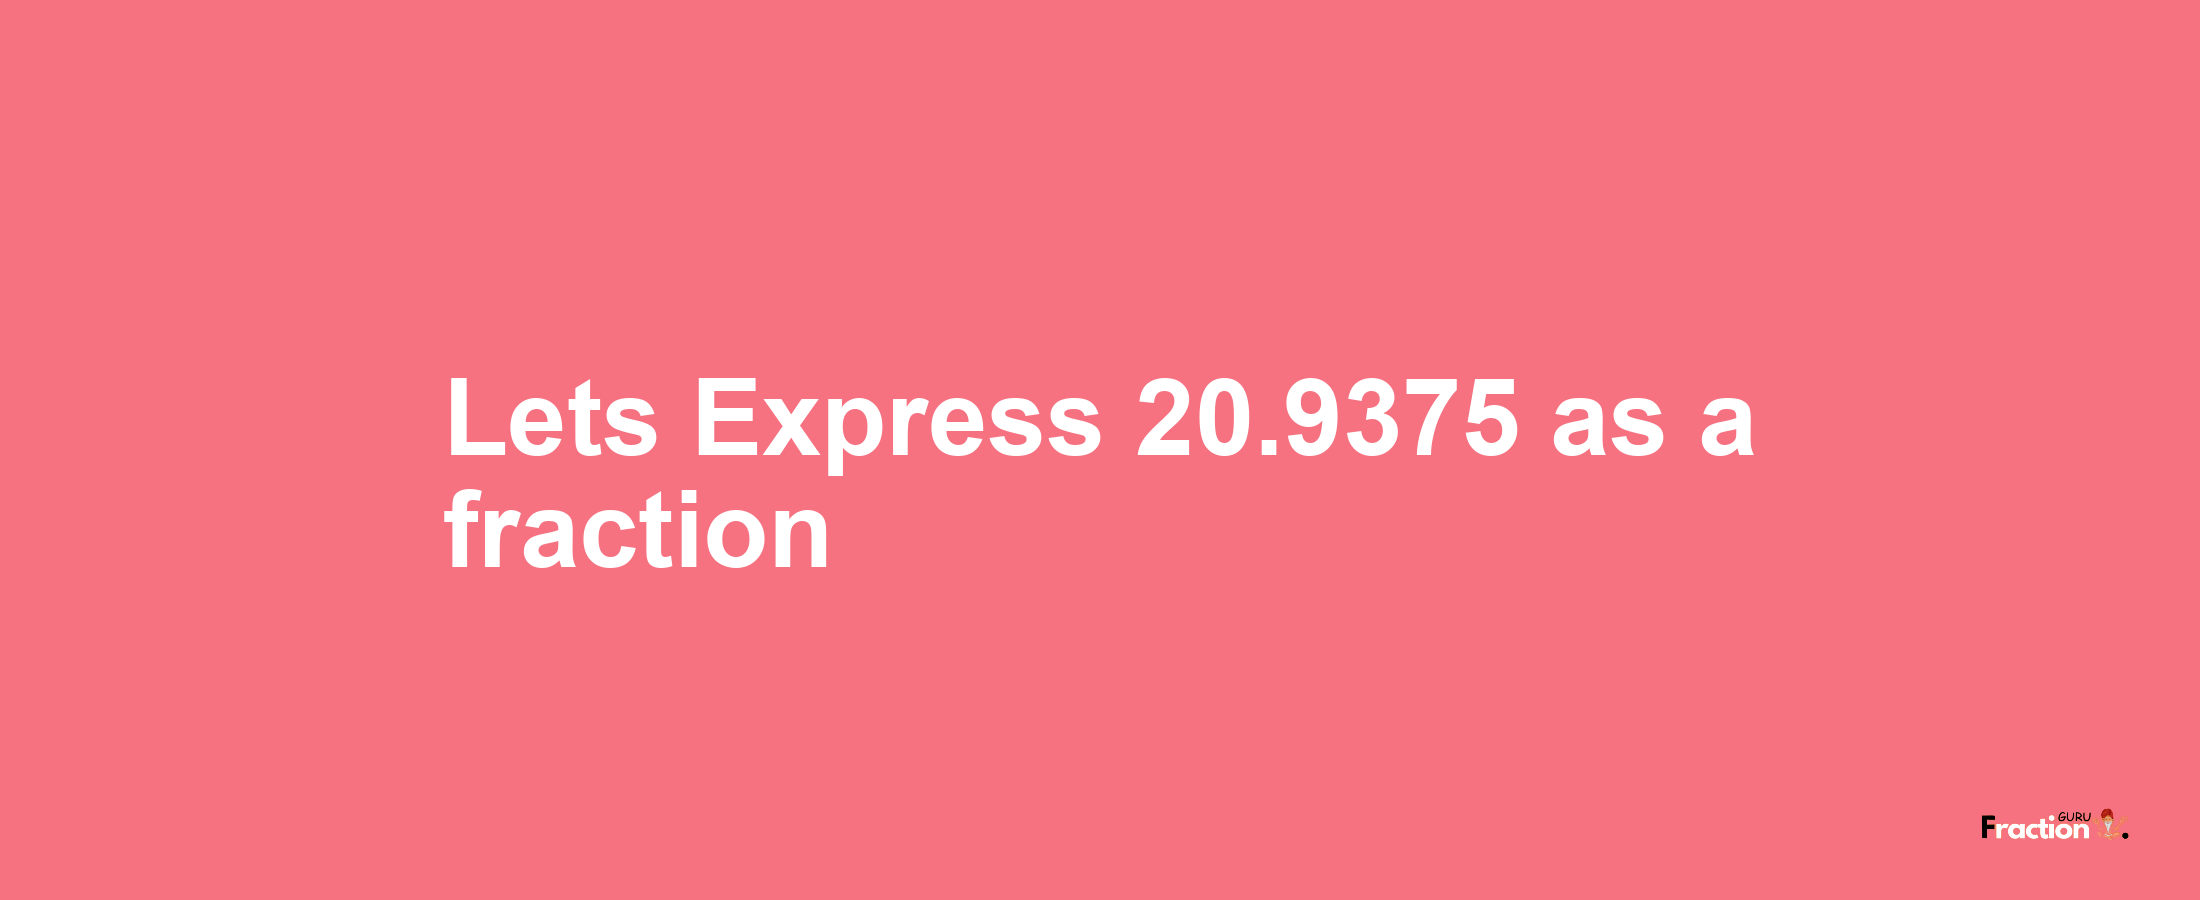 Lets Express 20.9375 as afraction